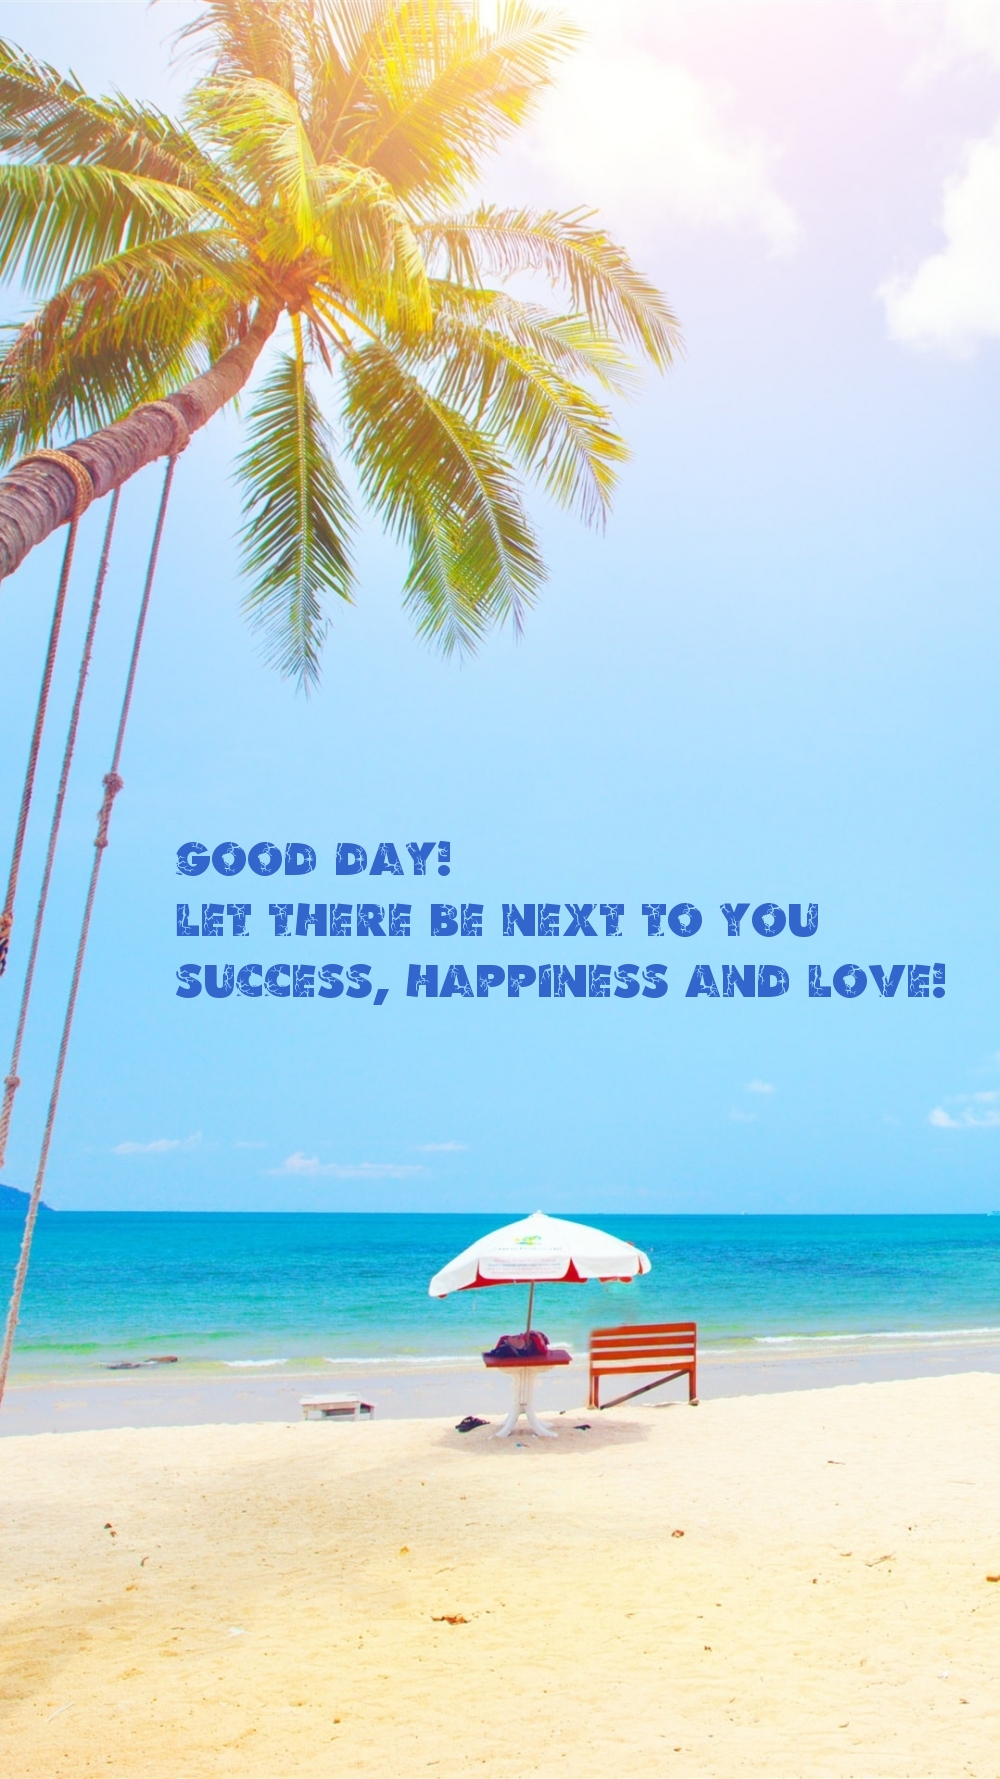 Good day!  Let there be next to you success